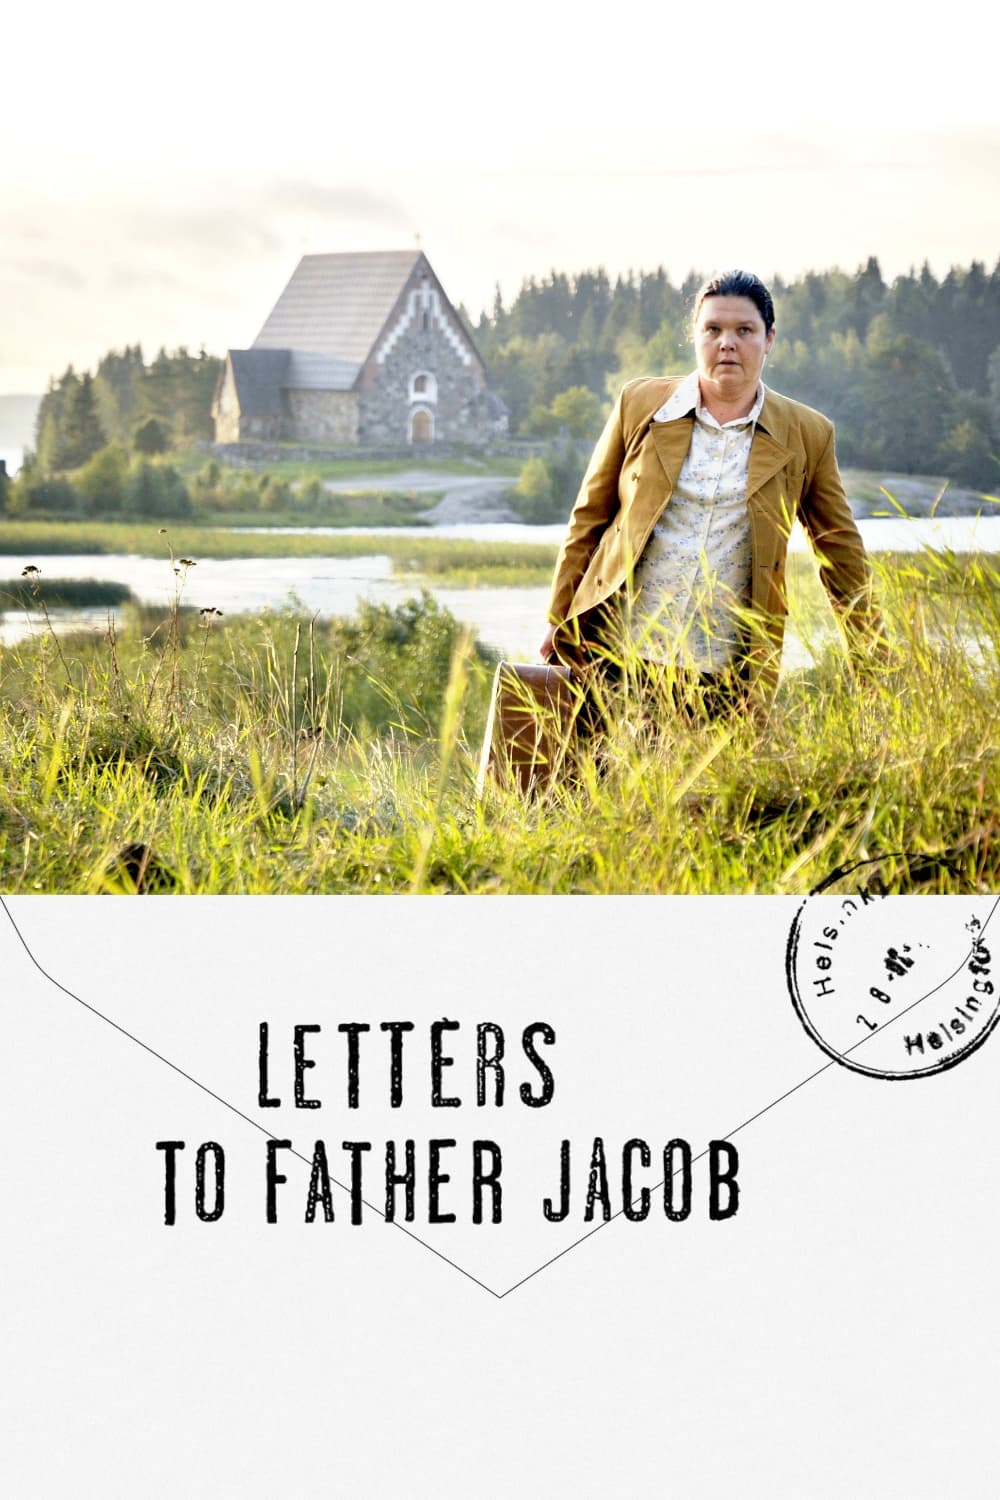 Letters to Father Jacob [Sub-ITA] [HD] (2009)